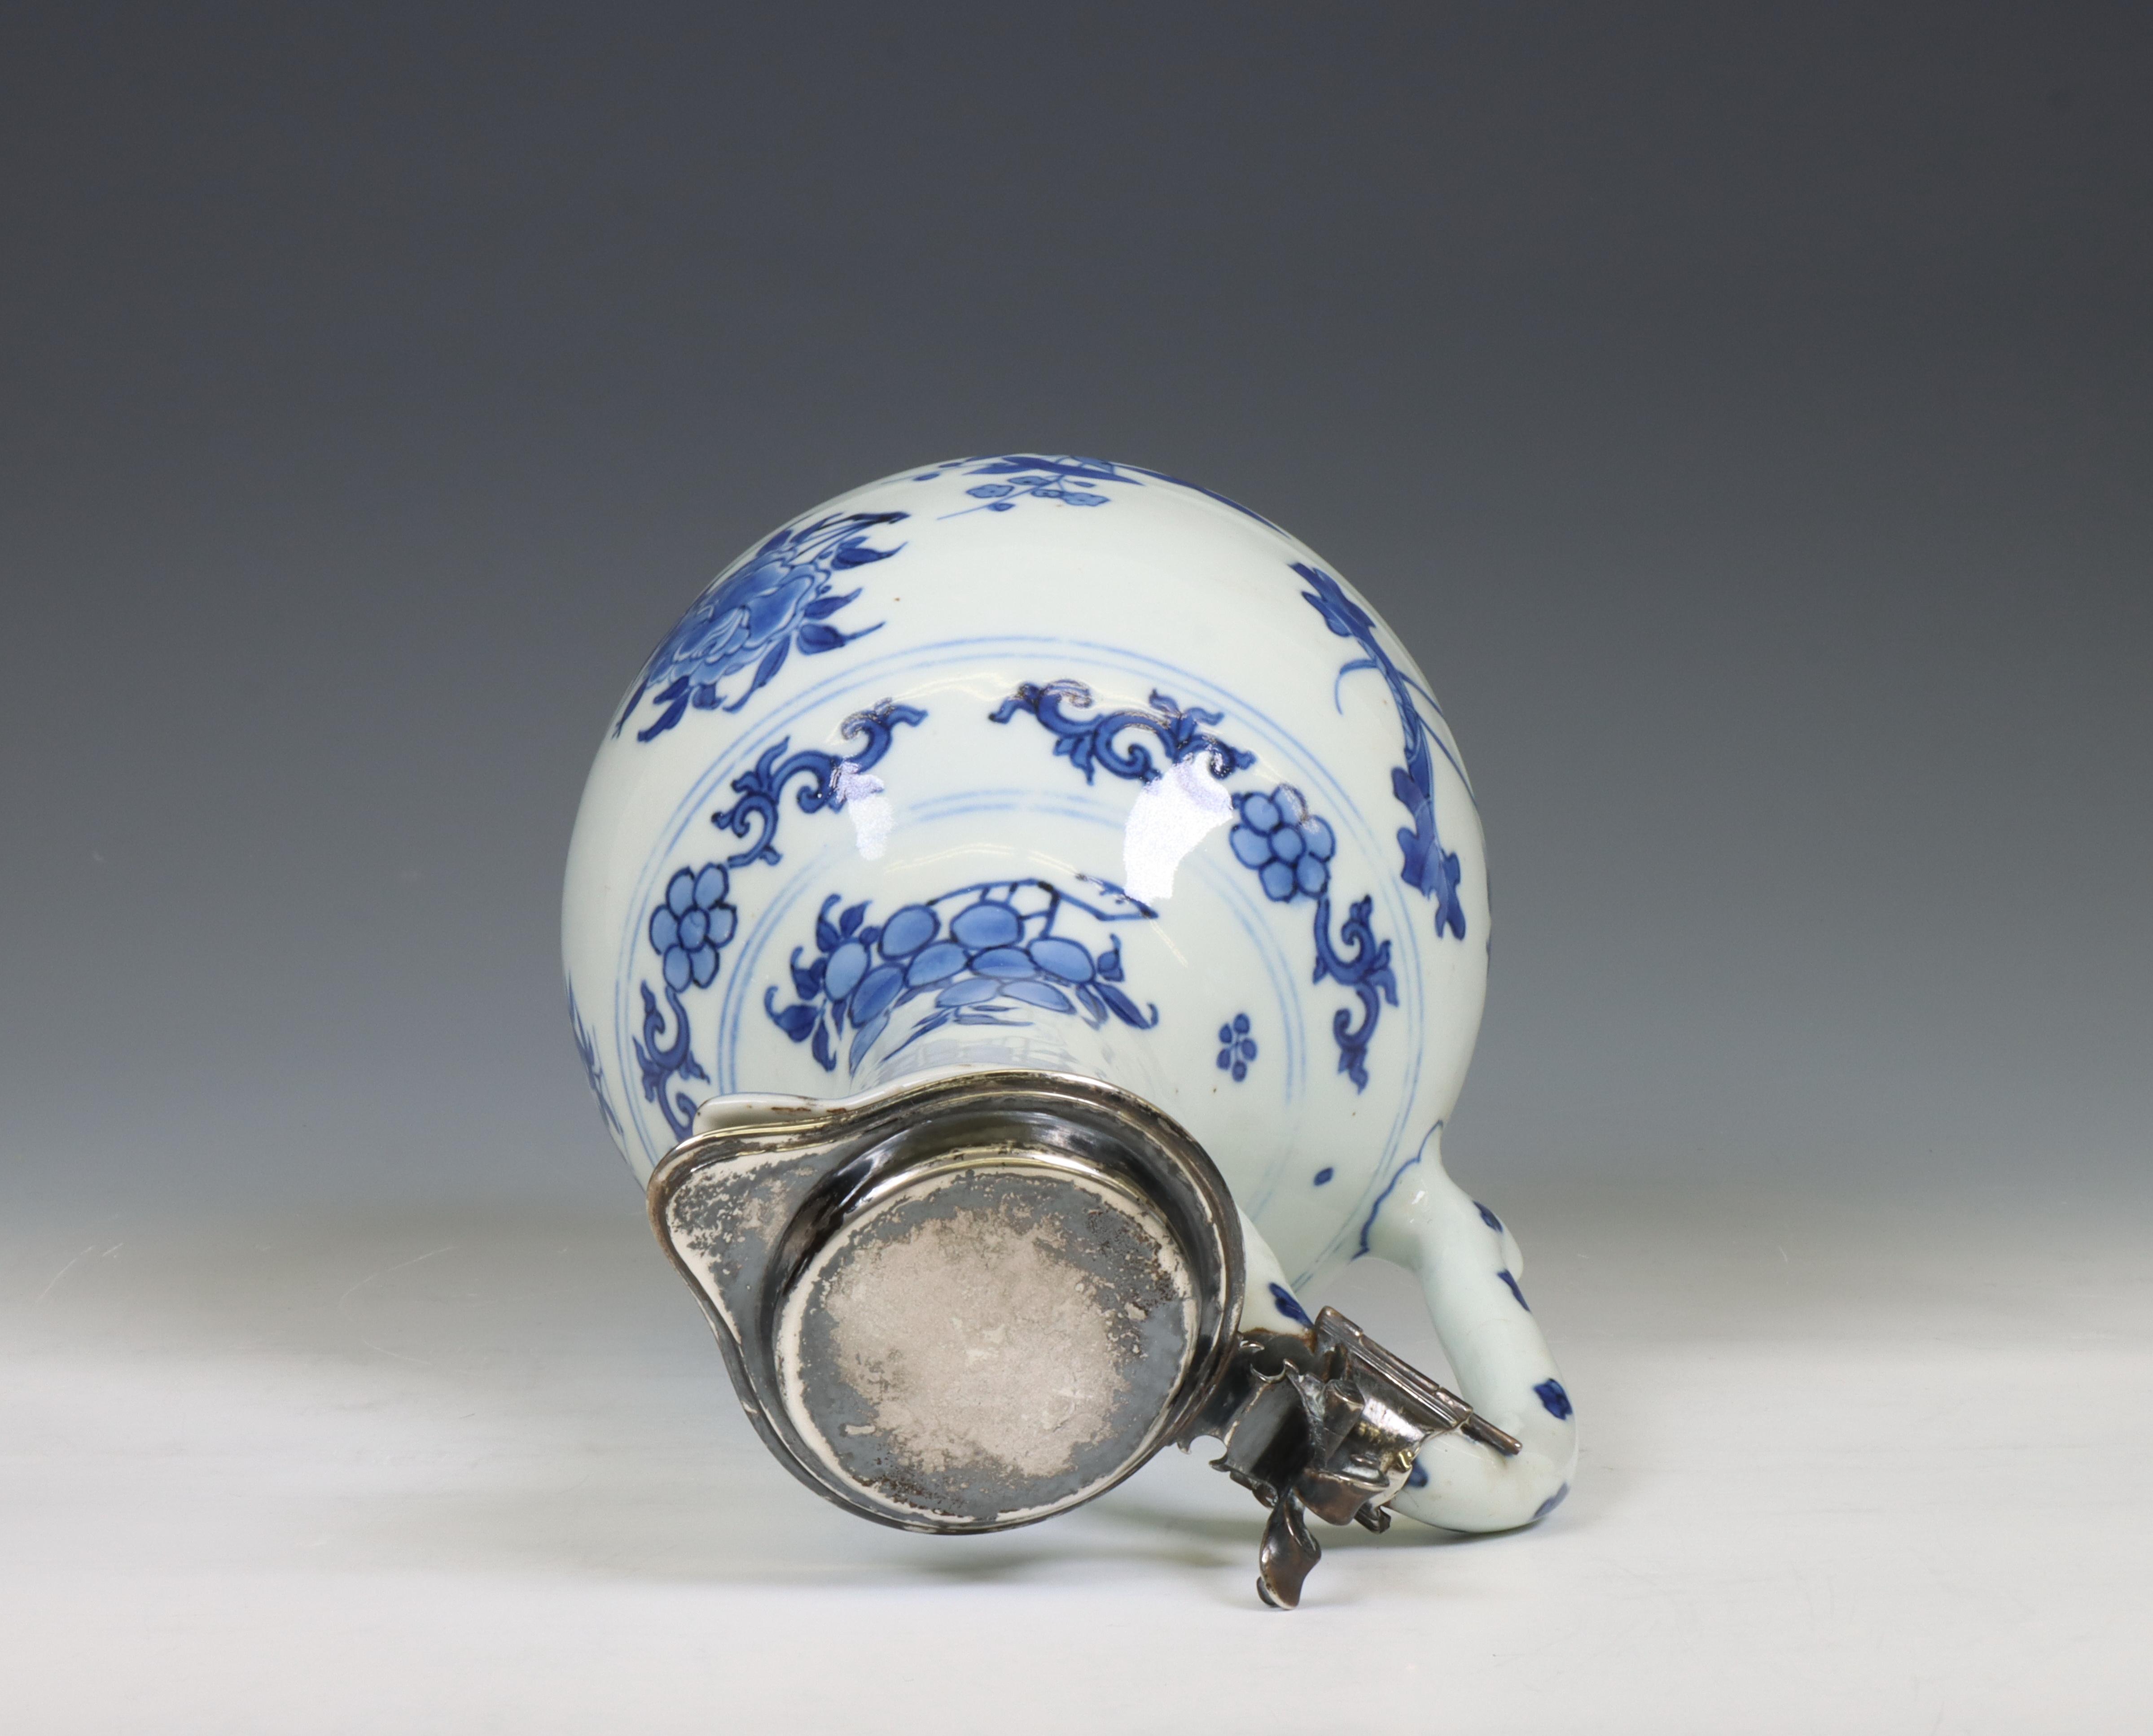 China, a Transitional silver-mounted blue and white porcelain ewer, mid 17th century, the silver lat - Image 4 of 6